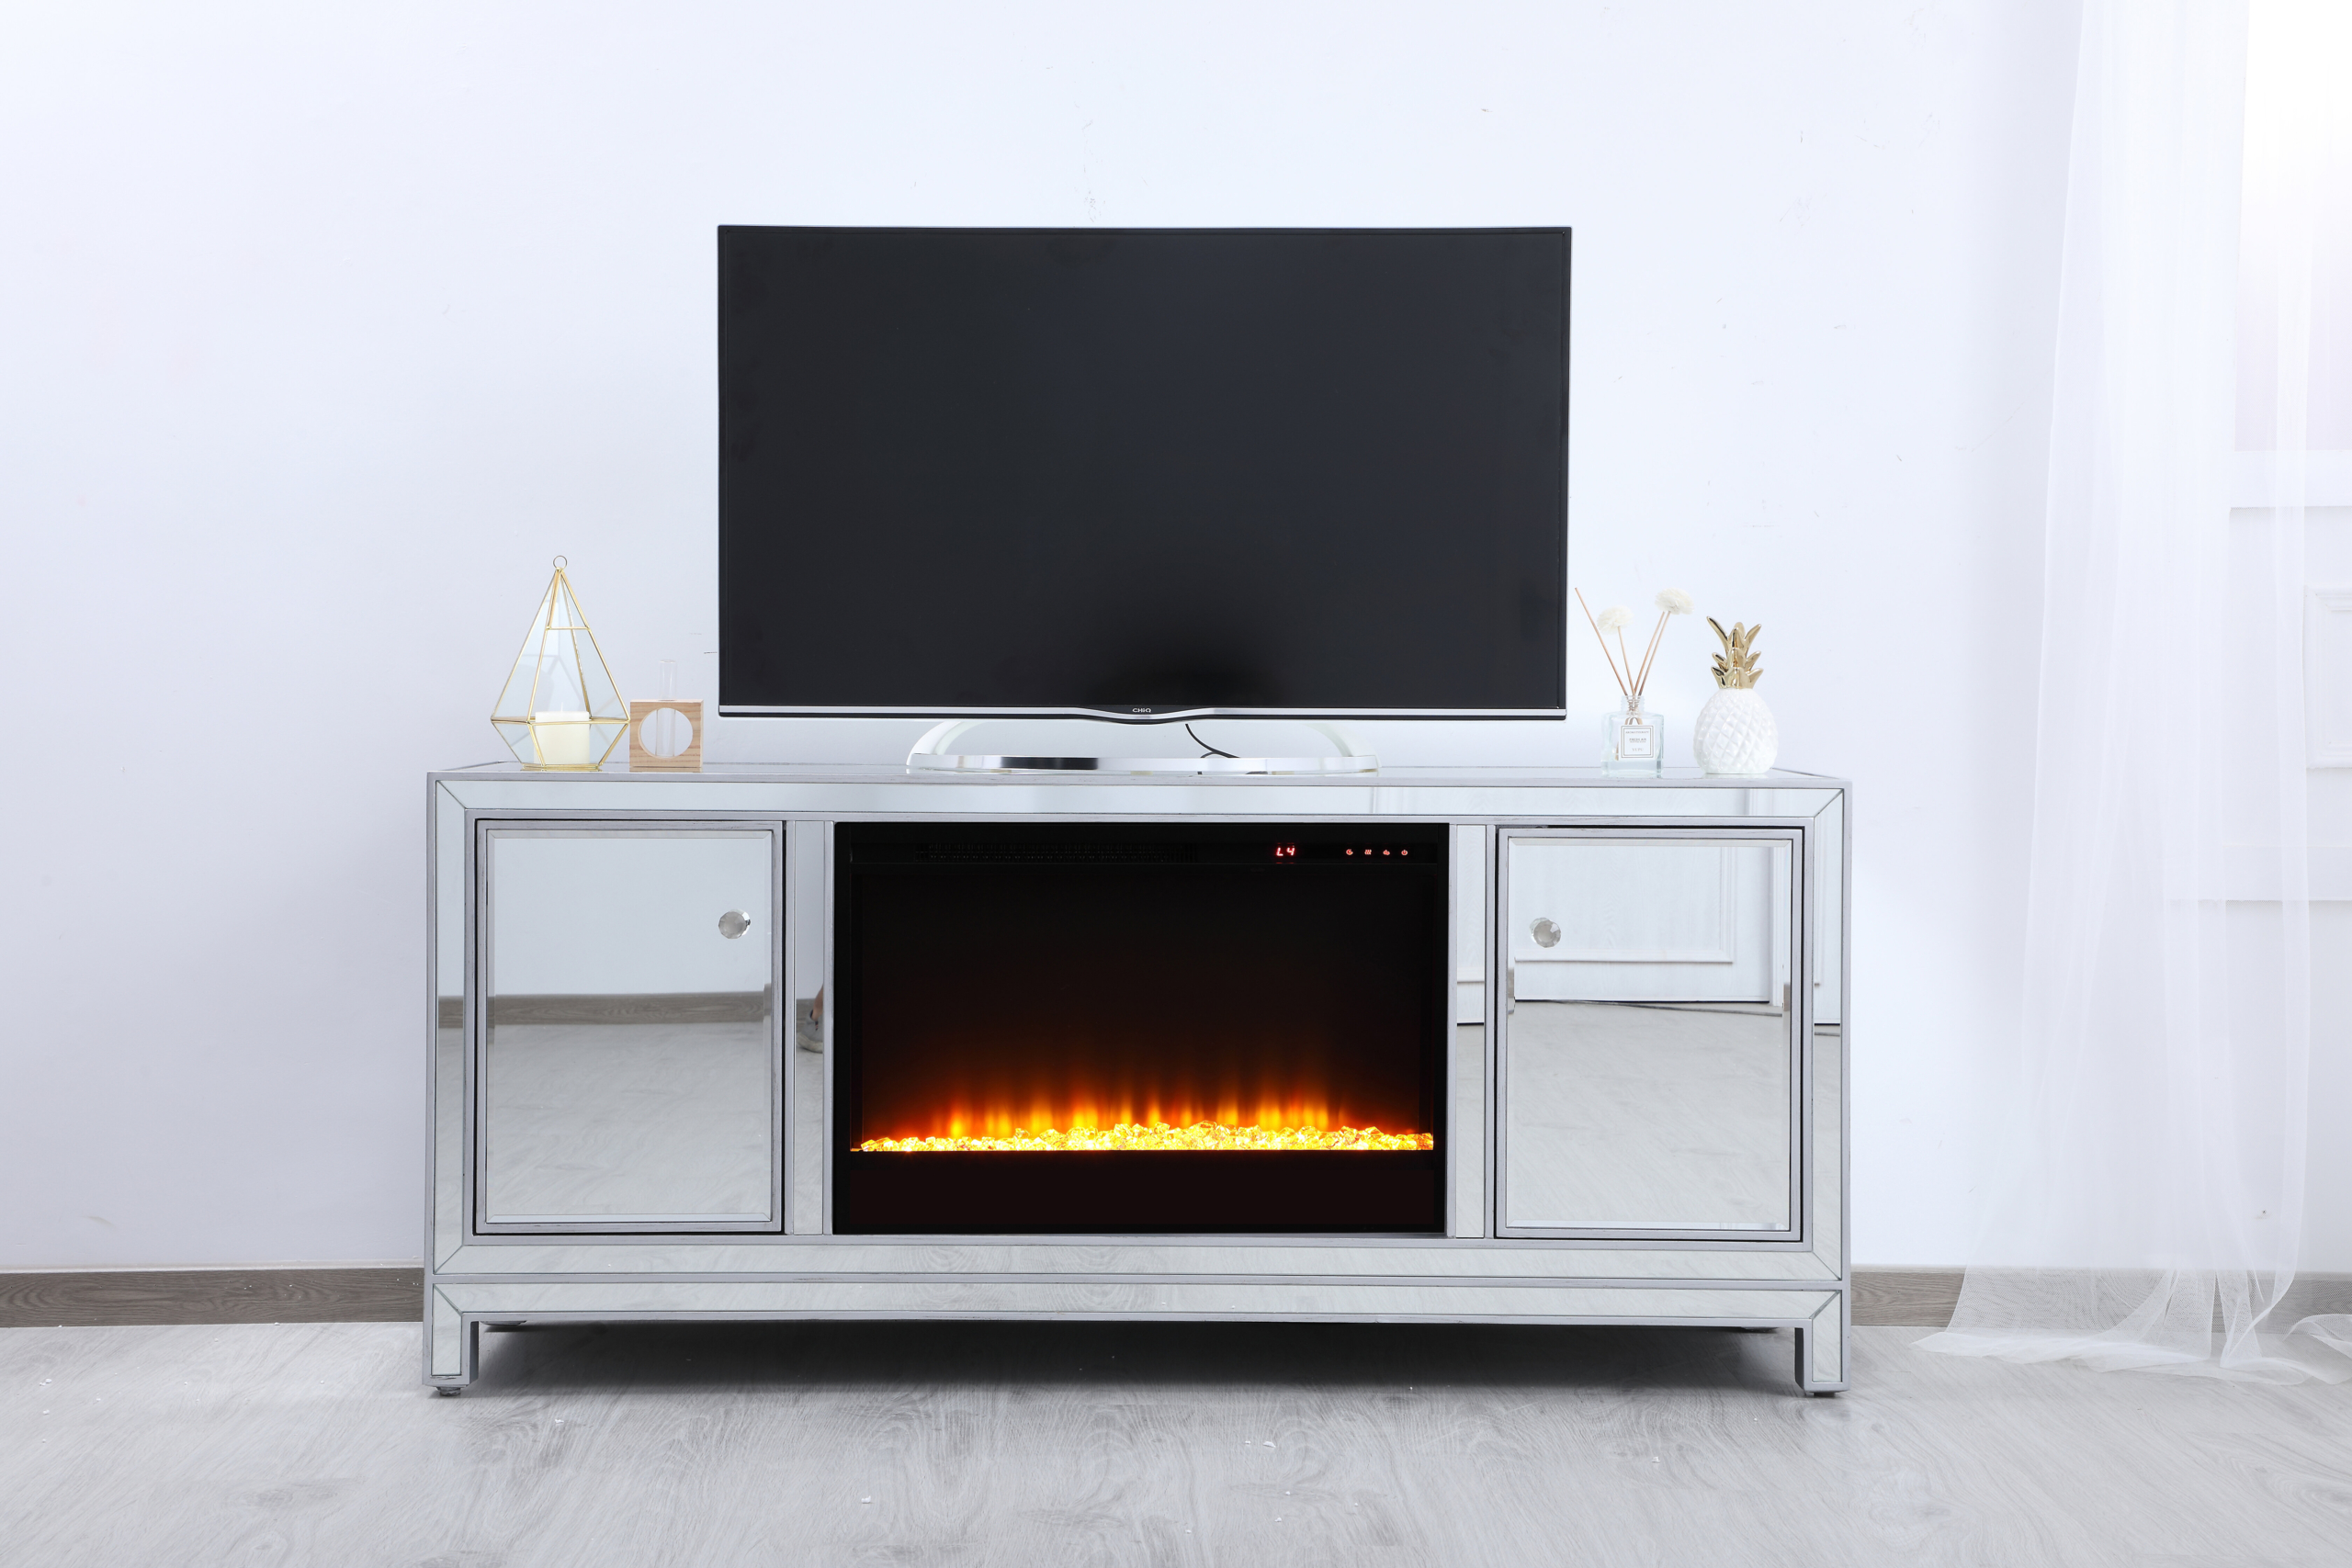 Abbotsford TV Stand for TVs up to 70" with Fireplace Included